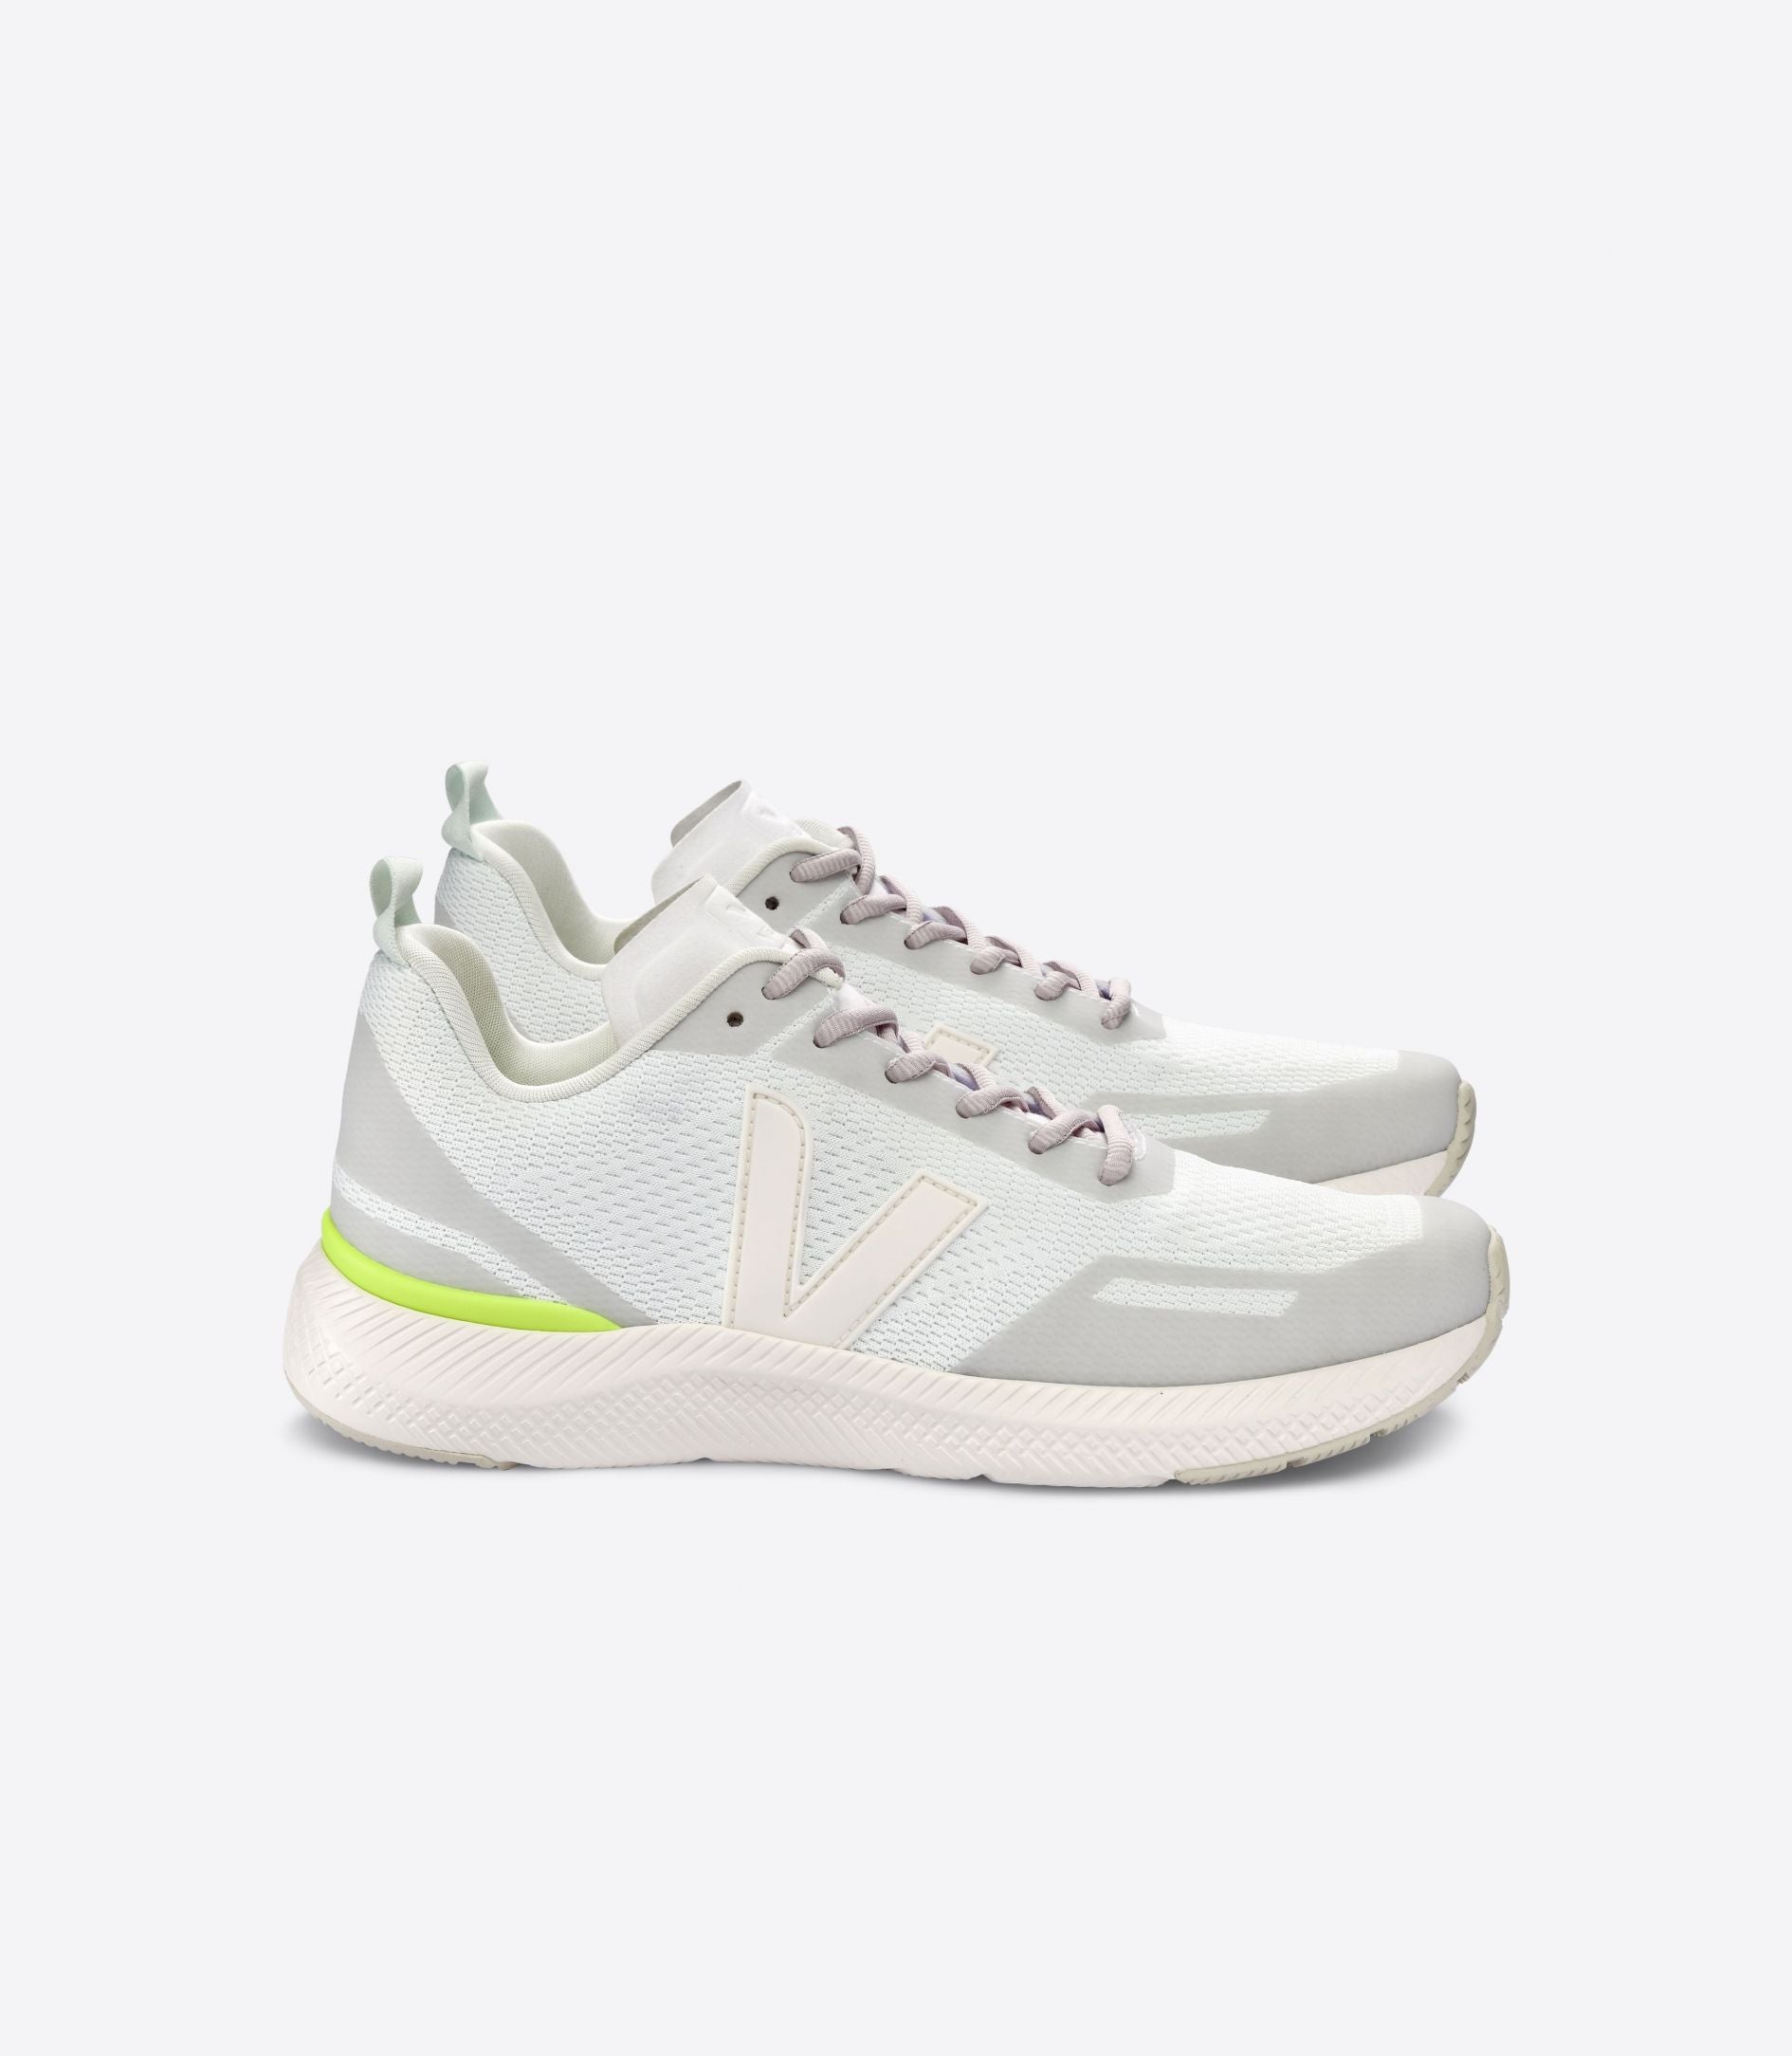 Lateral view of the Women's VEJA Impala in the color Frost/Cream